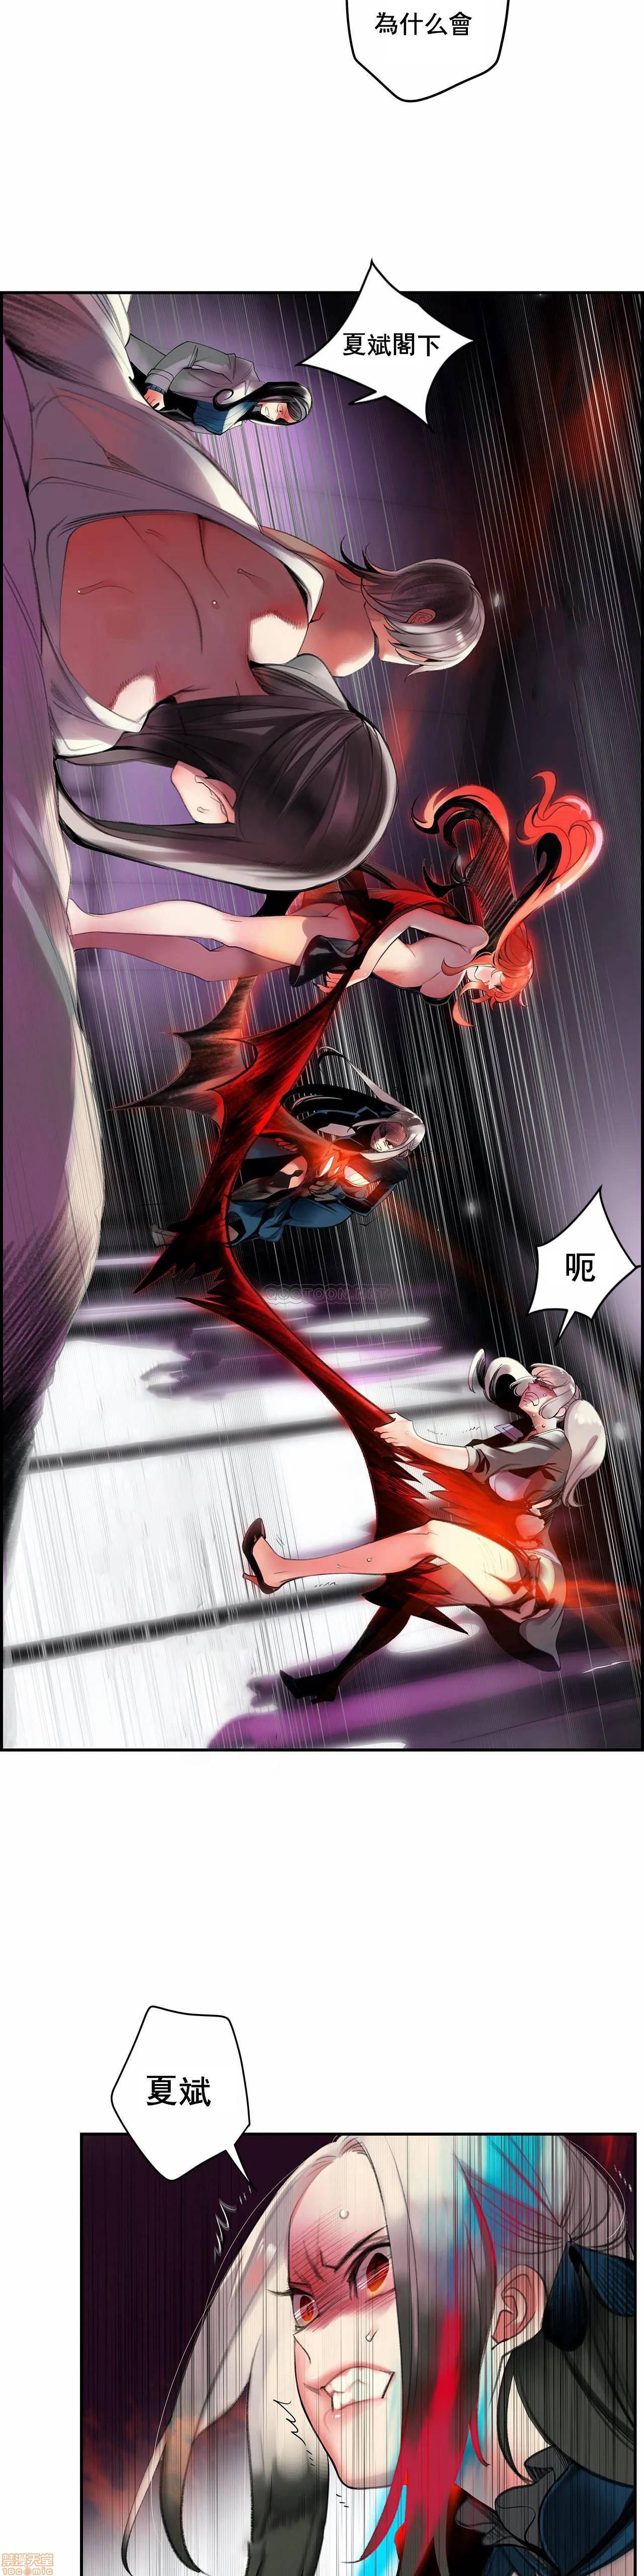 [Juder] Lilith`s Cord (第二季) Ch.77-93 end [Chinese] 71